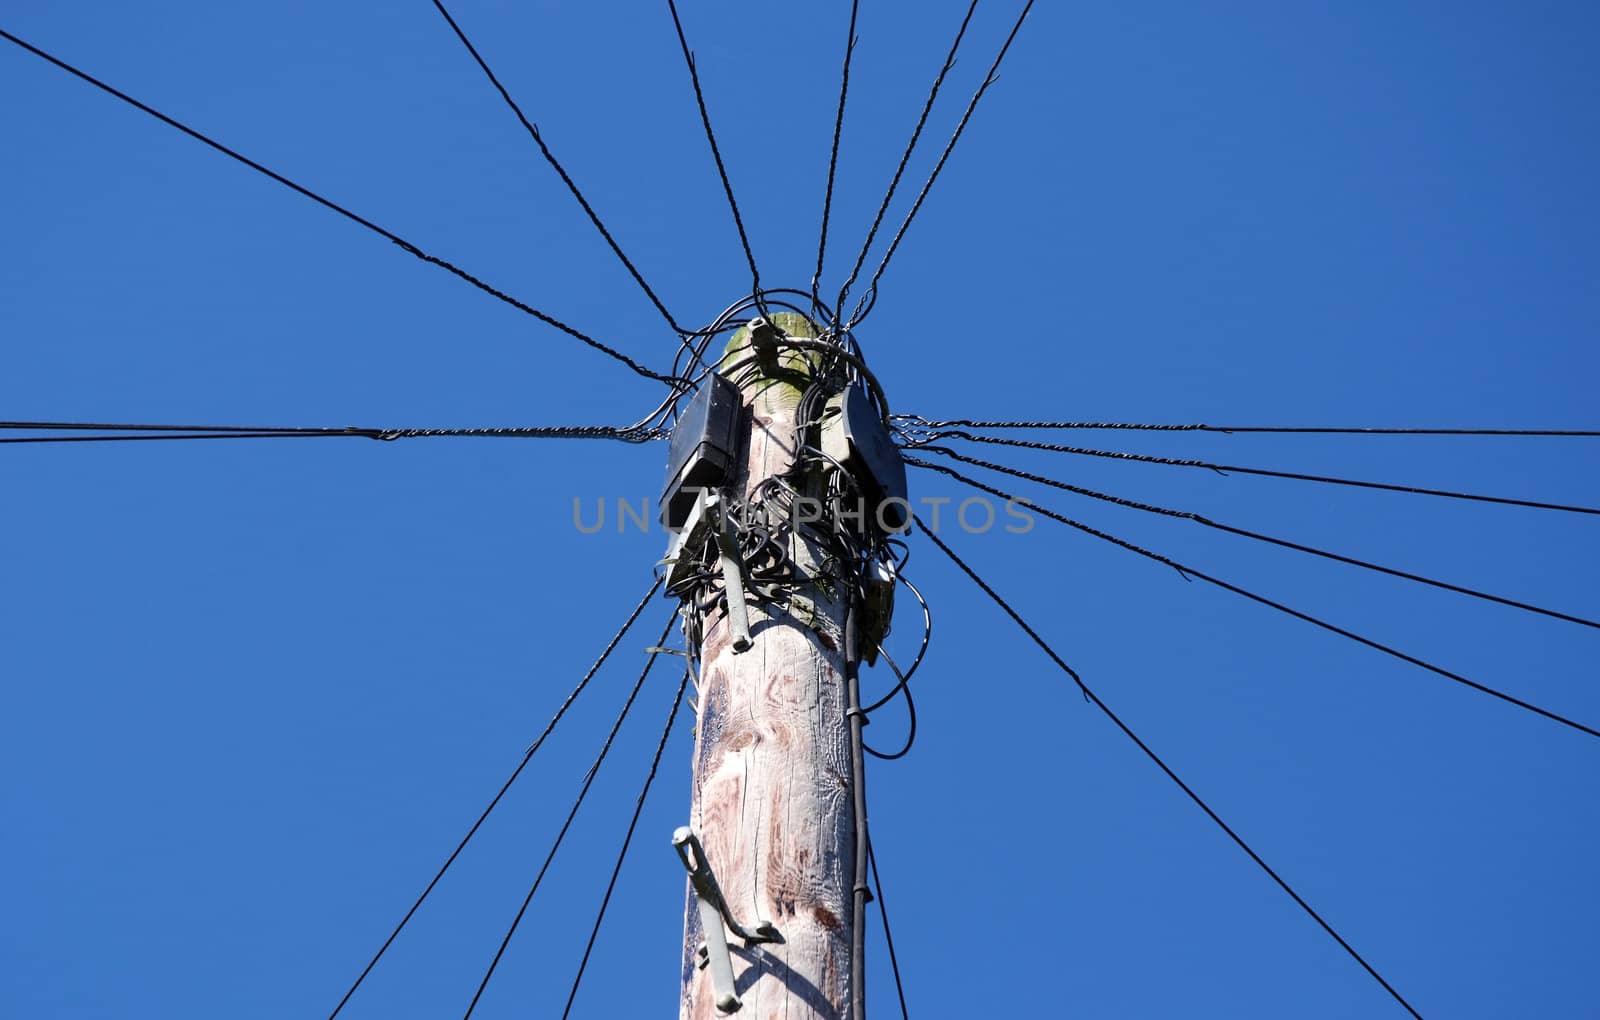 Telephone wires spread out in a circle from the pole